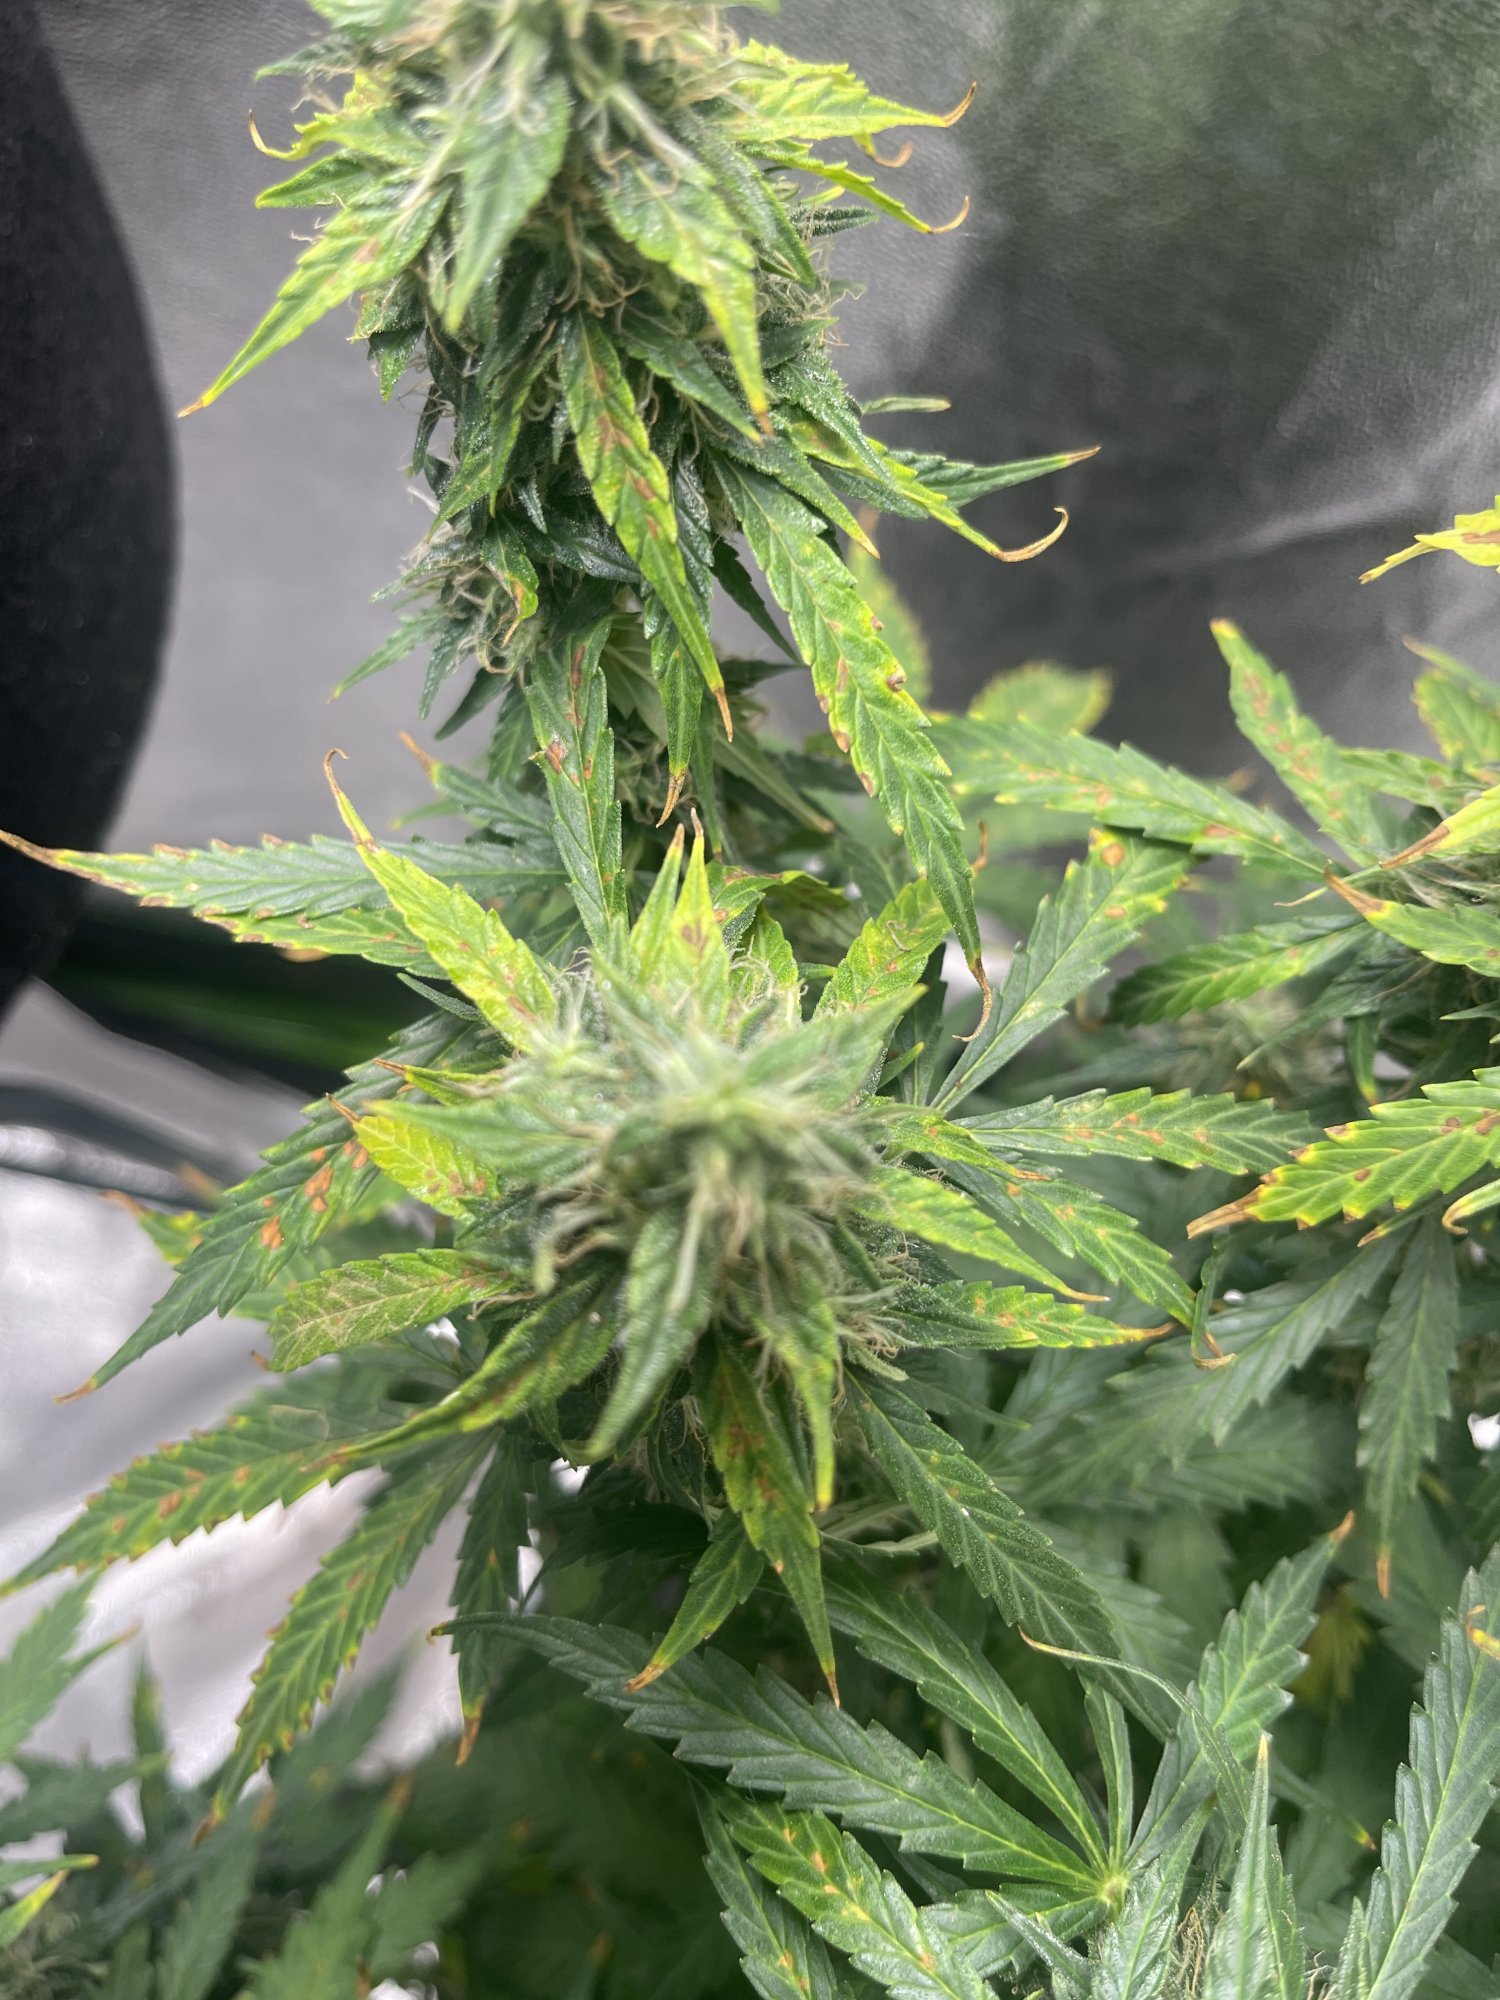 Problems with my northern lights auto 3